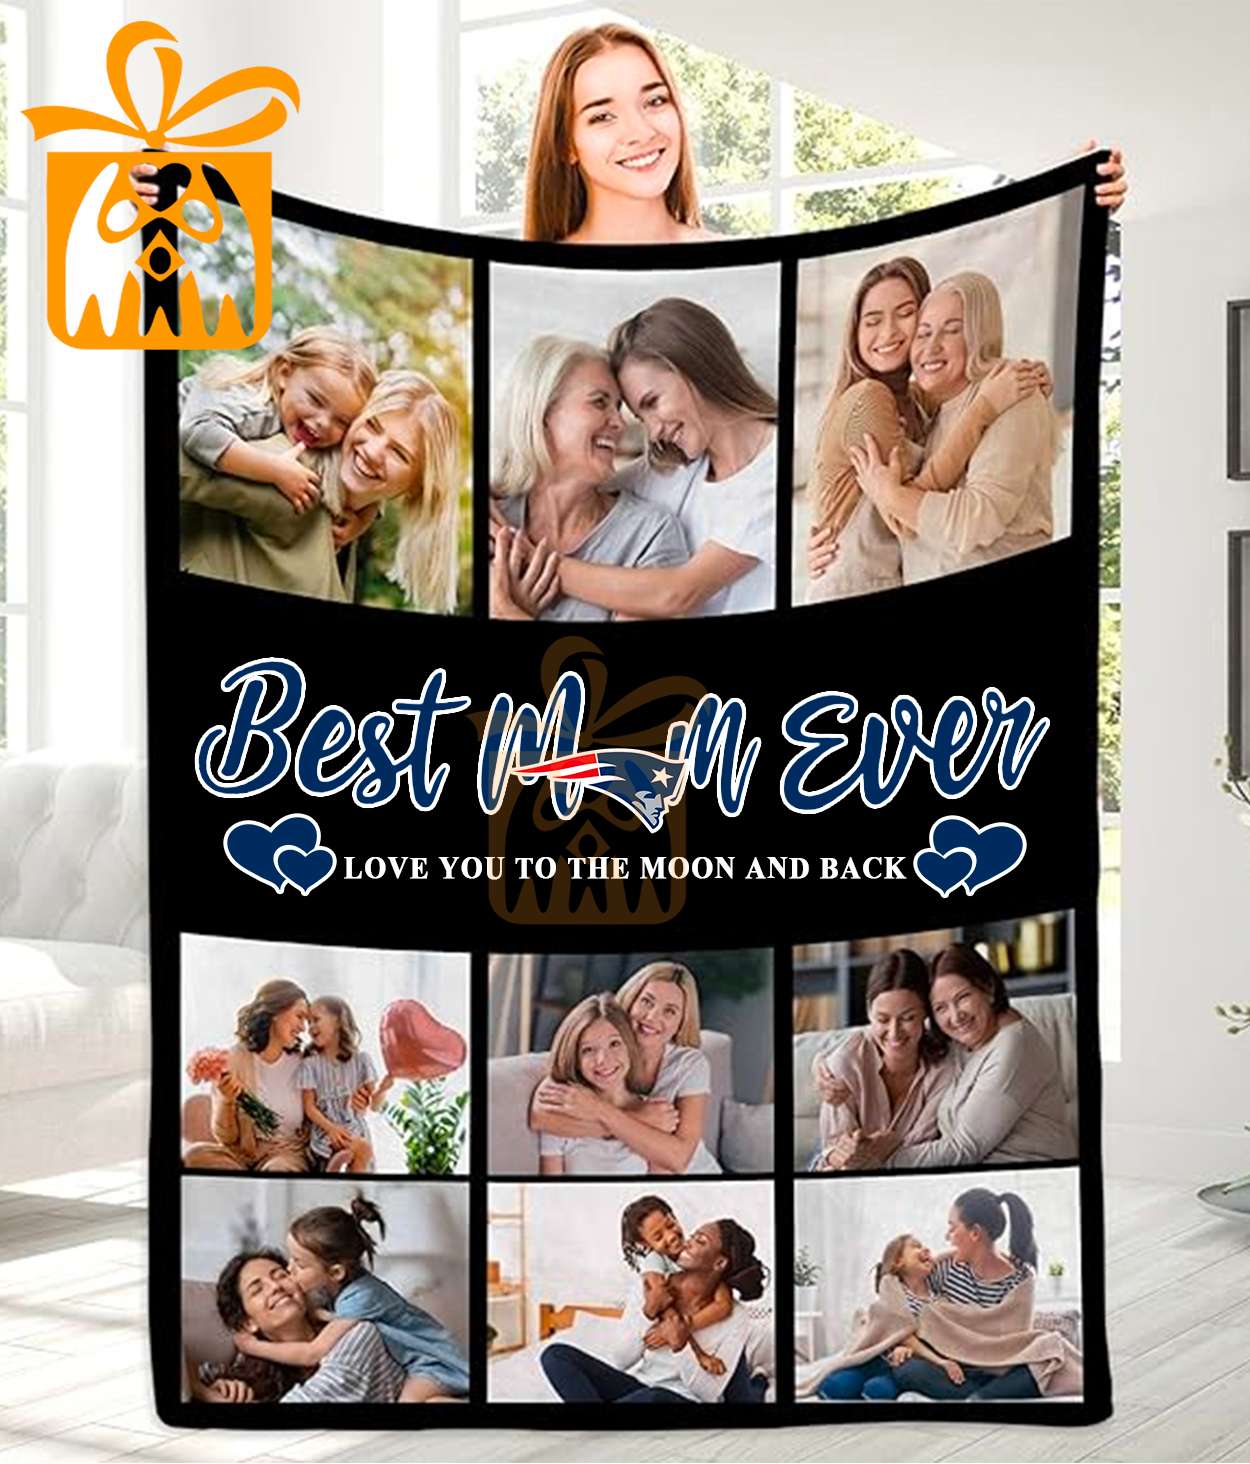 Best Mom Ever Custom NFL New England Patriots Blankets with Pictures - Perfect Mother’s Day Gift